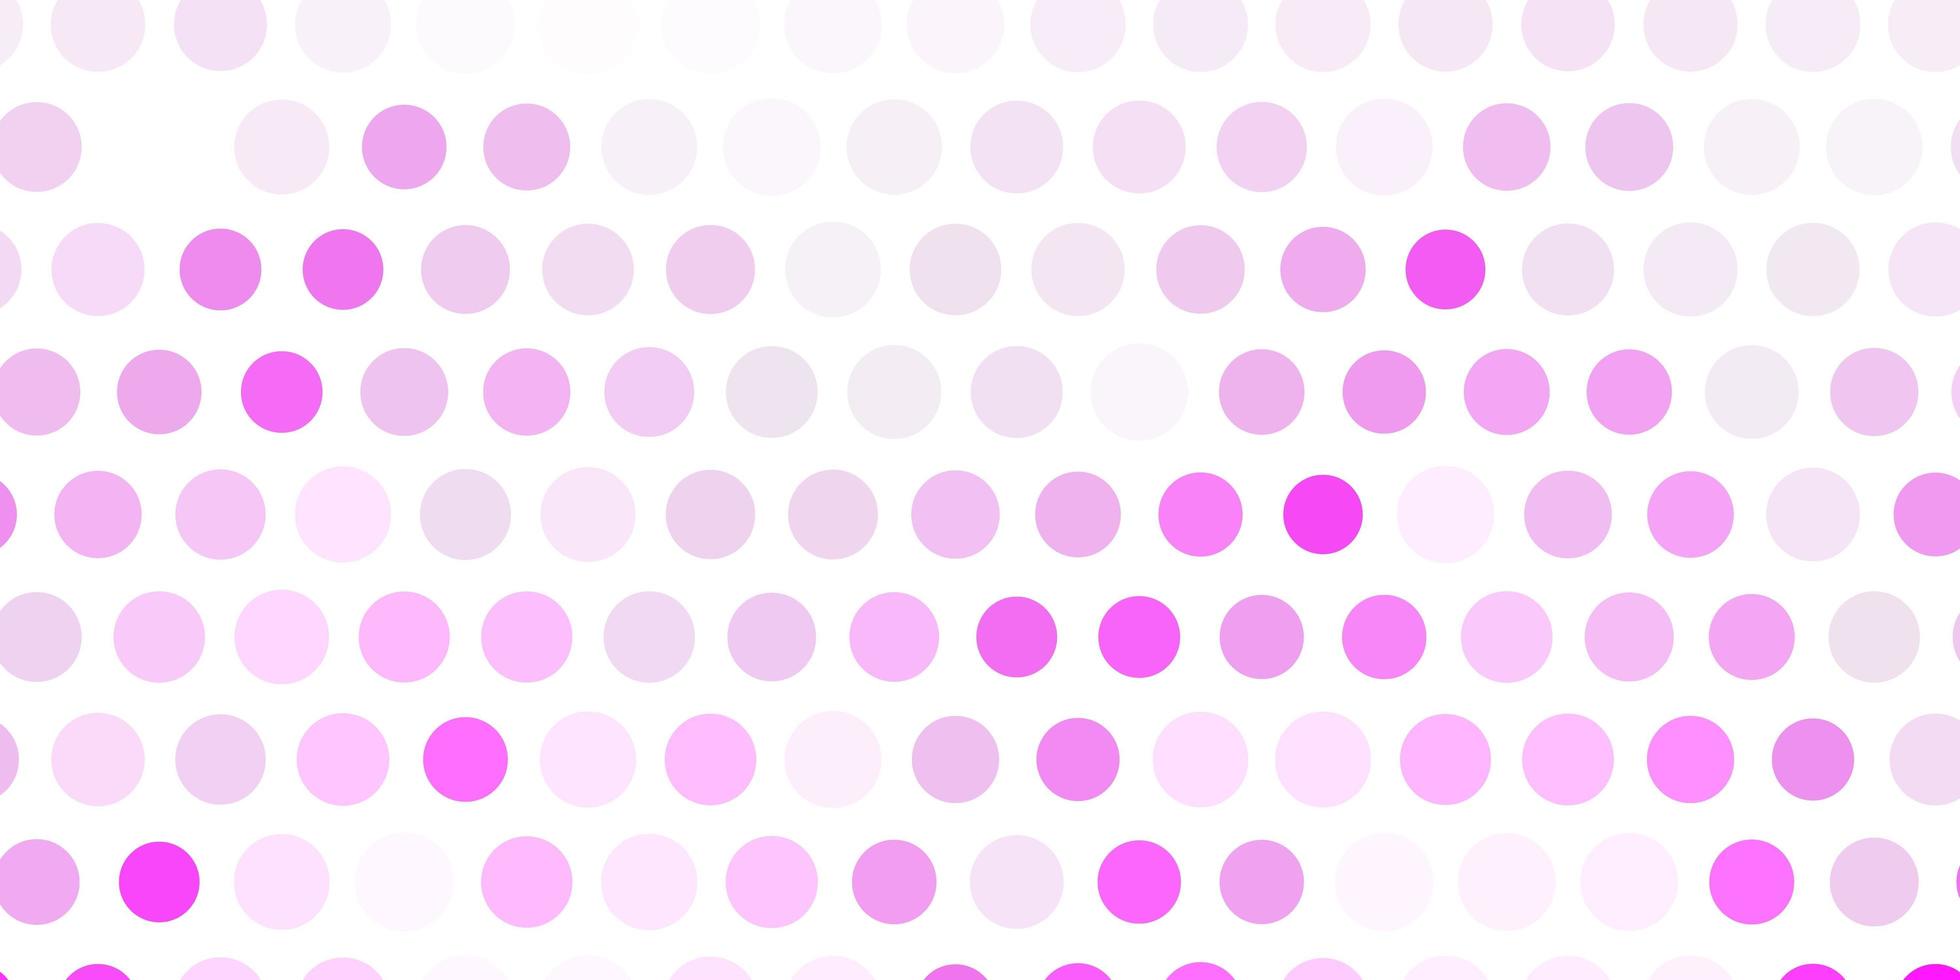 Light pink vector background with bubbles.